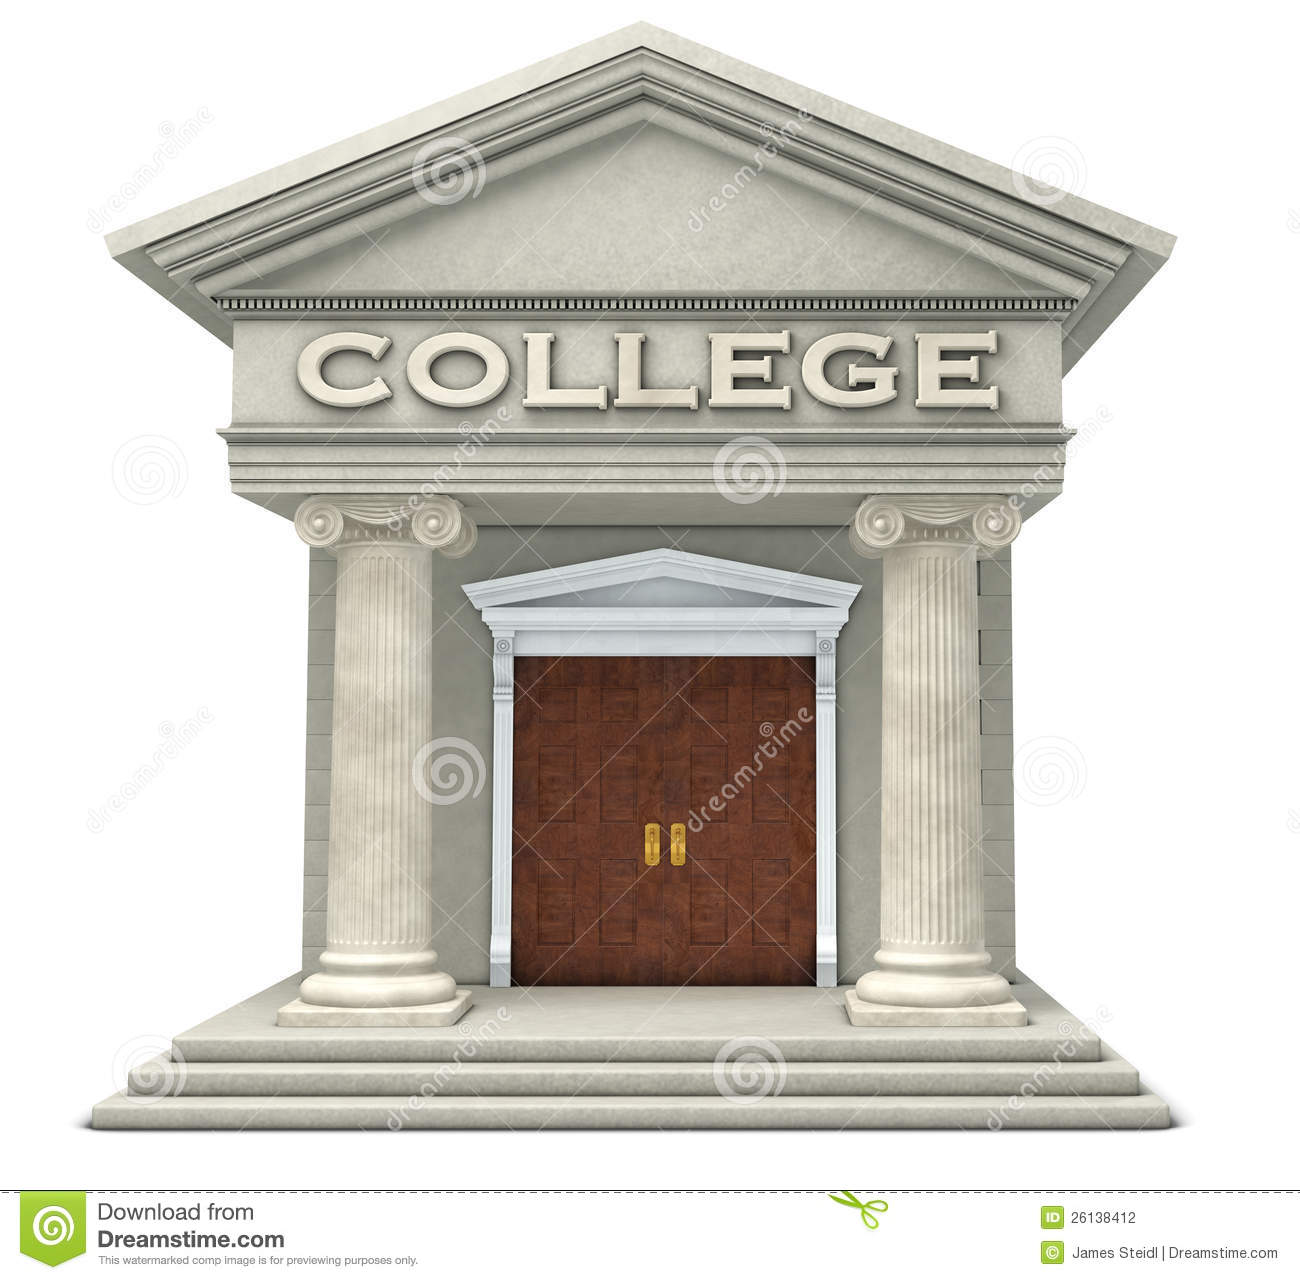 Iconic Caricature Of A College Building Isolated On A White Background